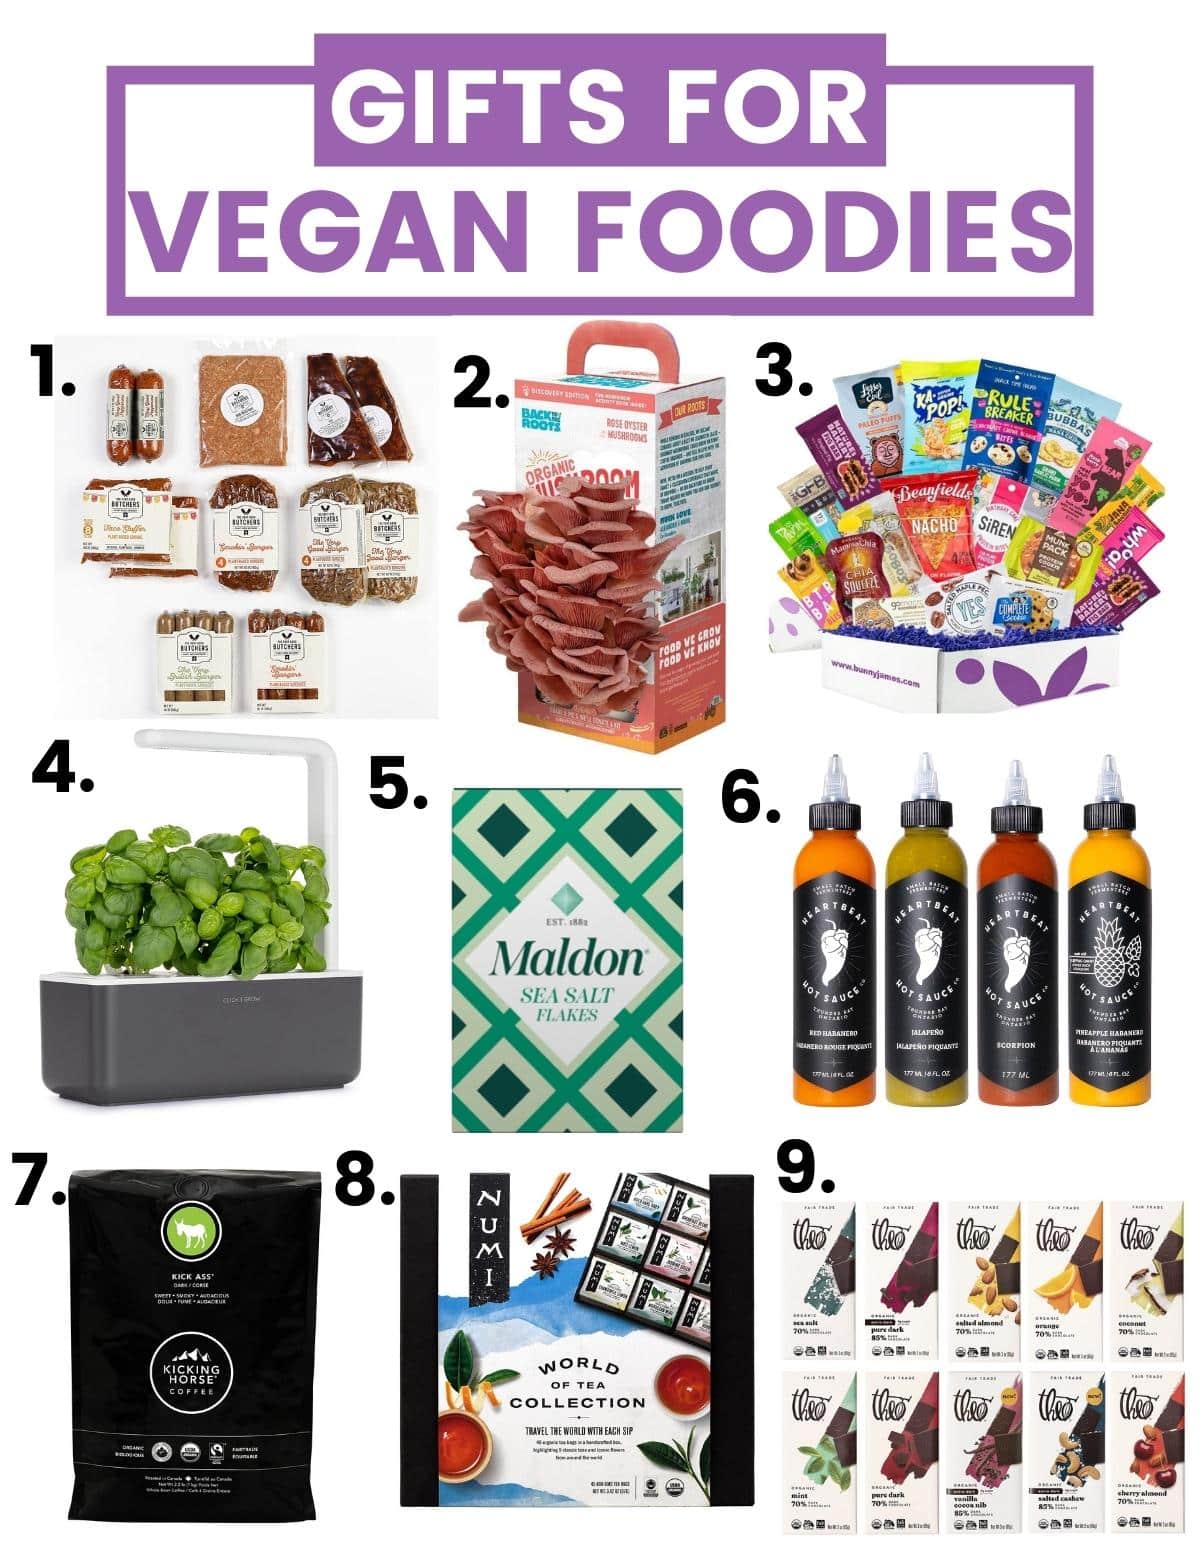 gifts for vegan foodies